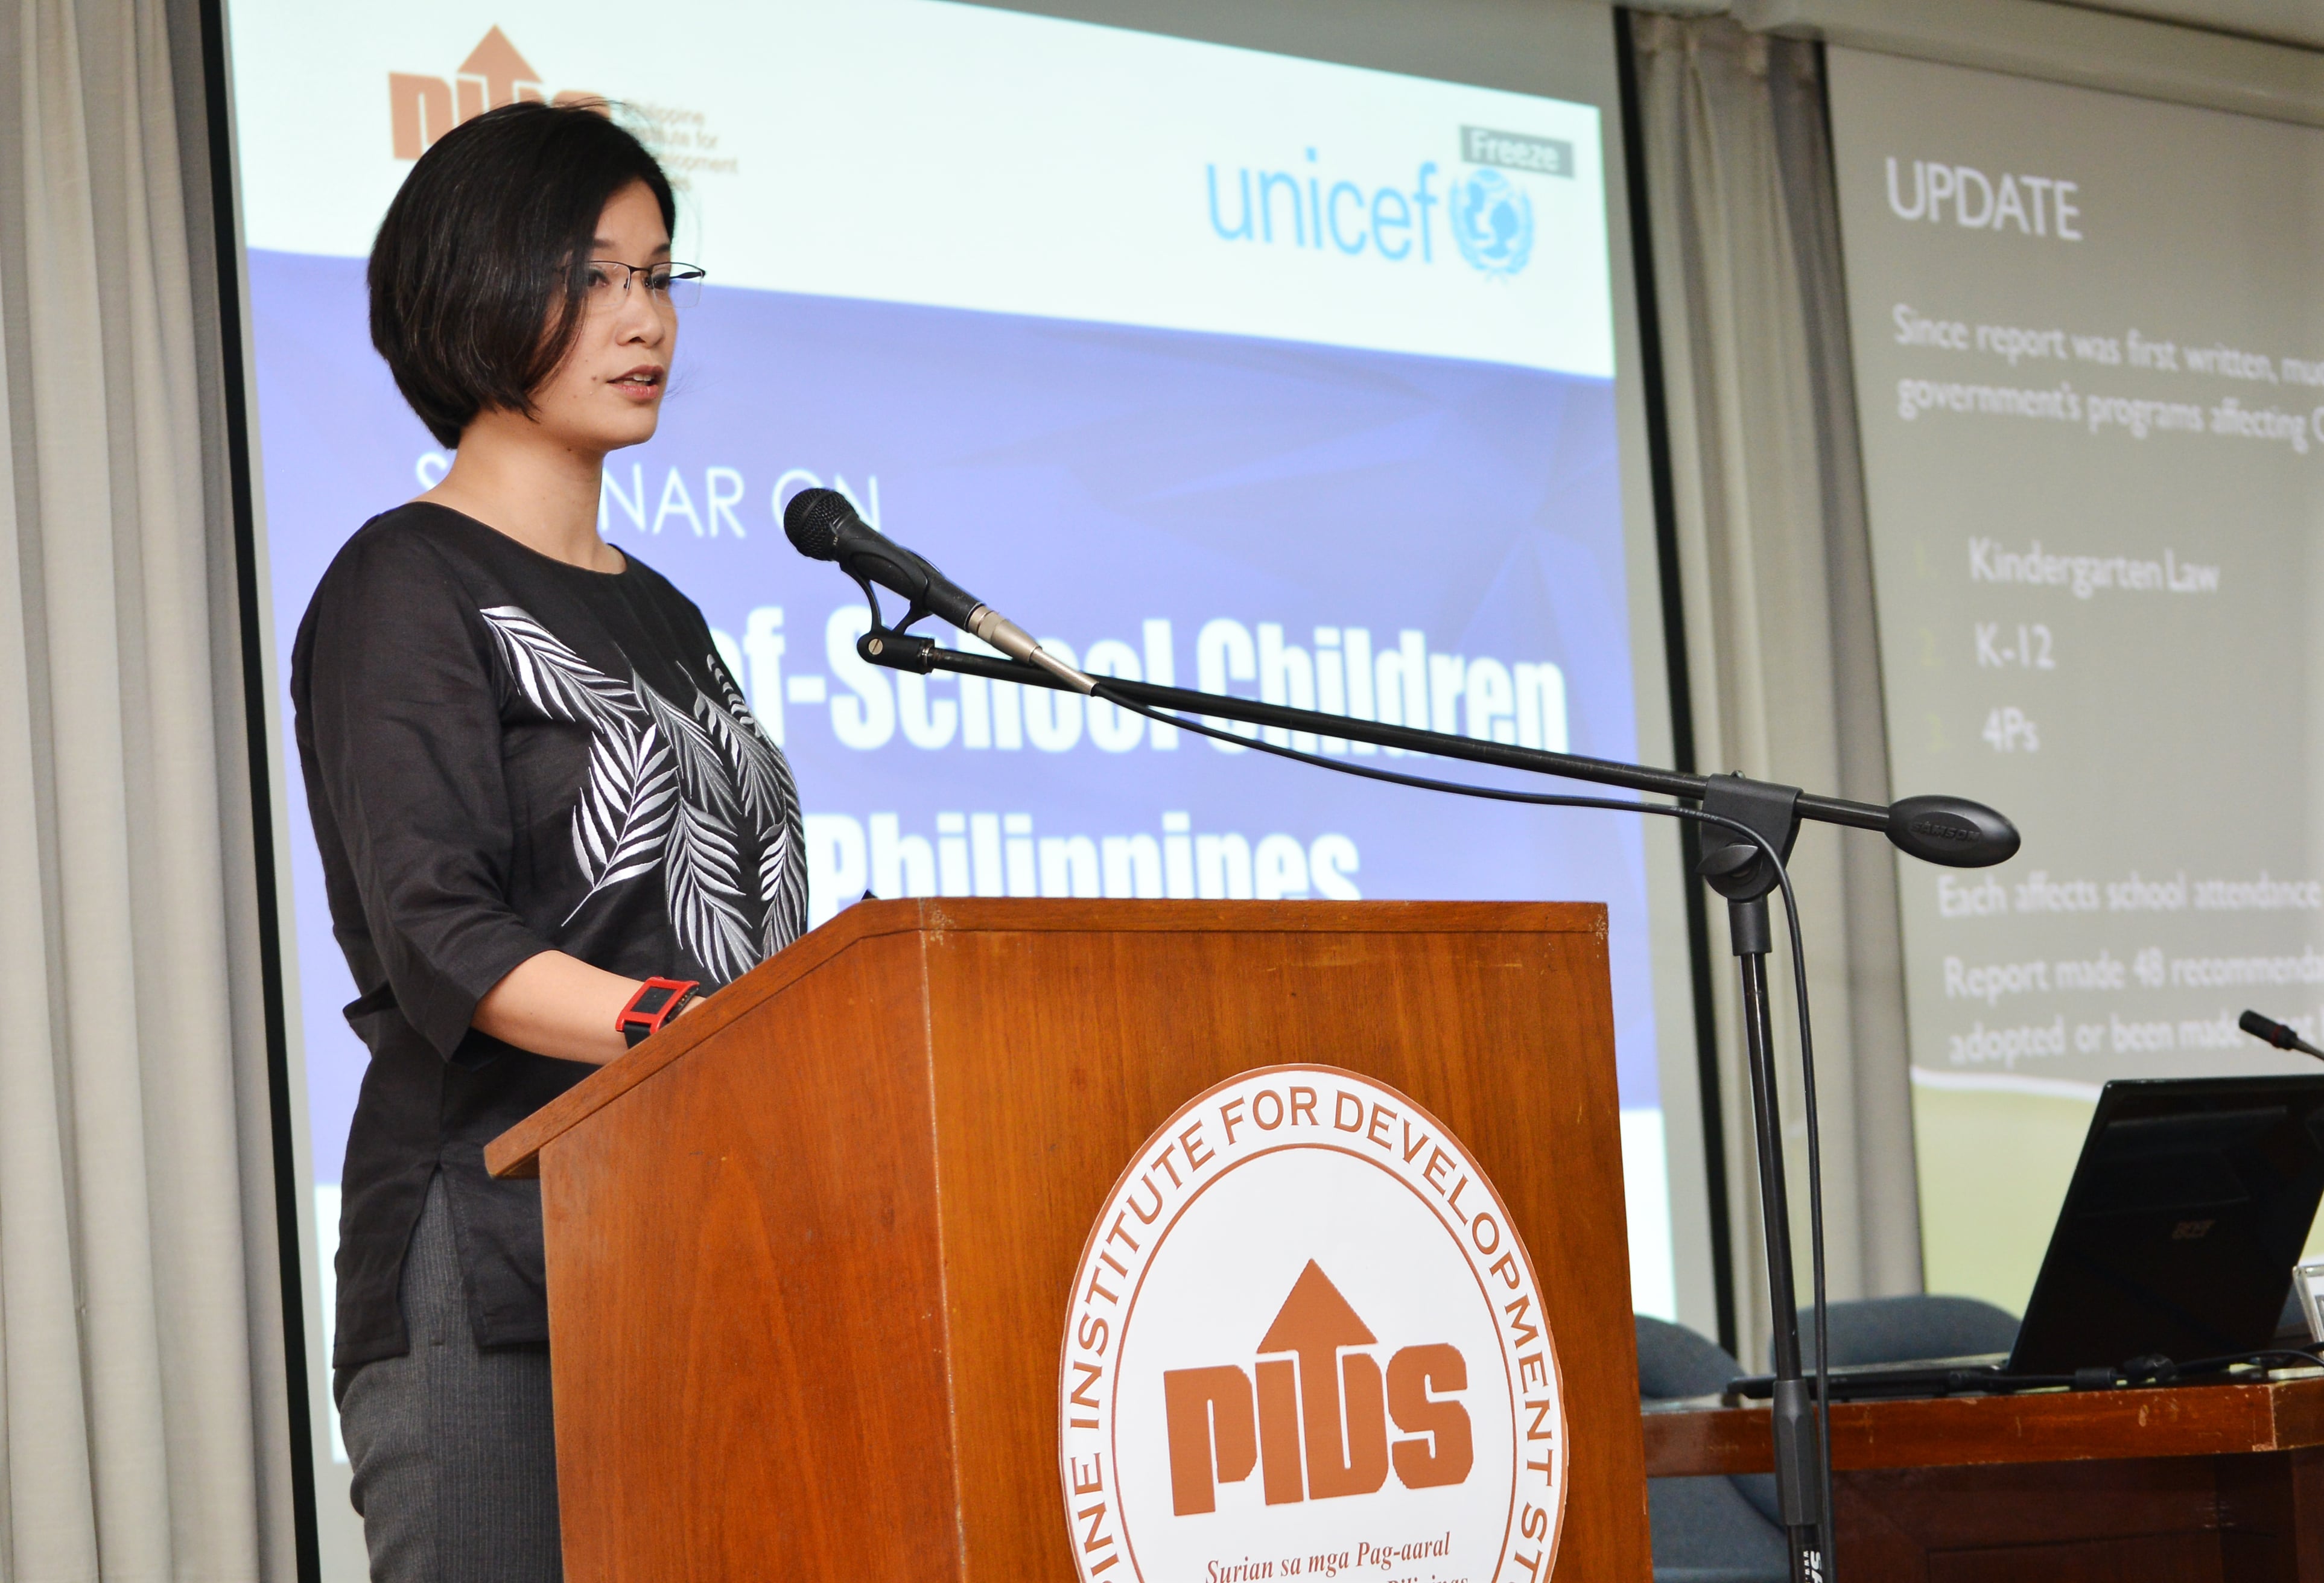 Seminar On Out-Of-School Children (OOSC) In The Philippines-DSC_3130.jpg